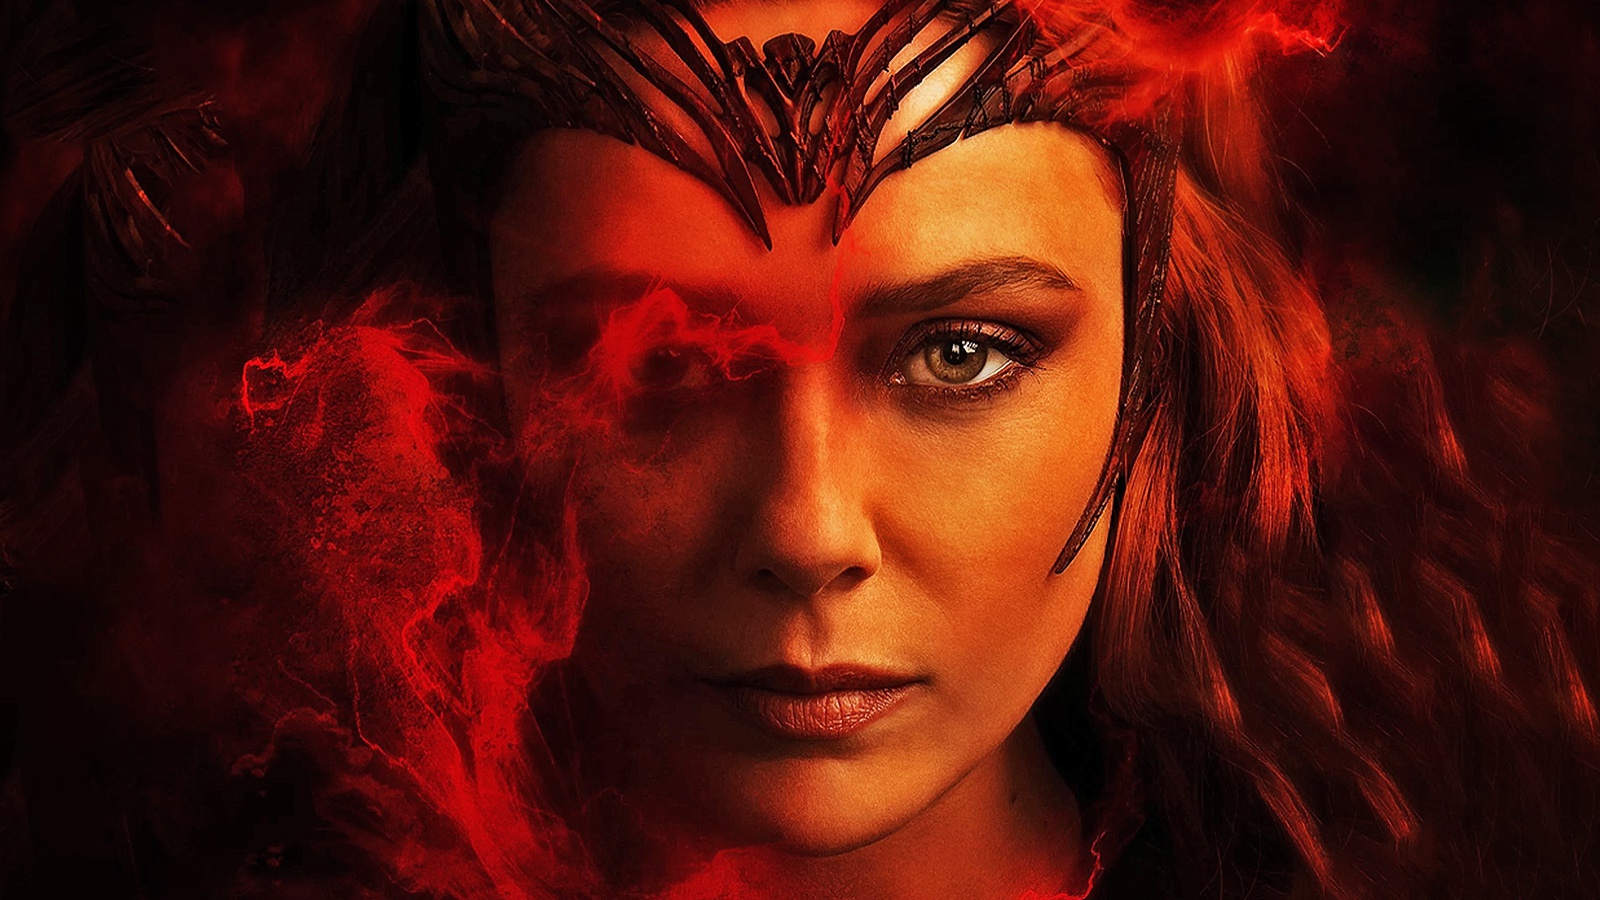 Will Scarlet Witch Really Return to the Marvel Cinematic Universe?